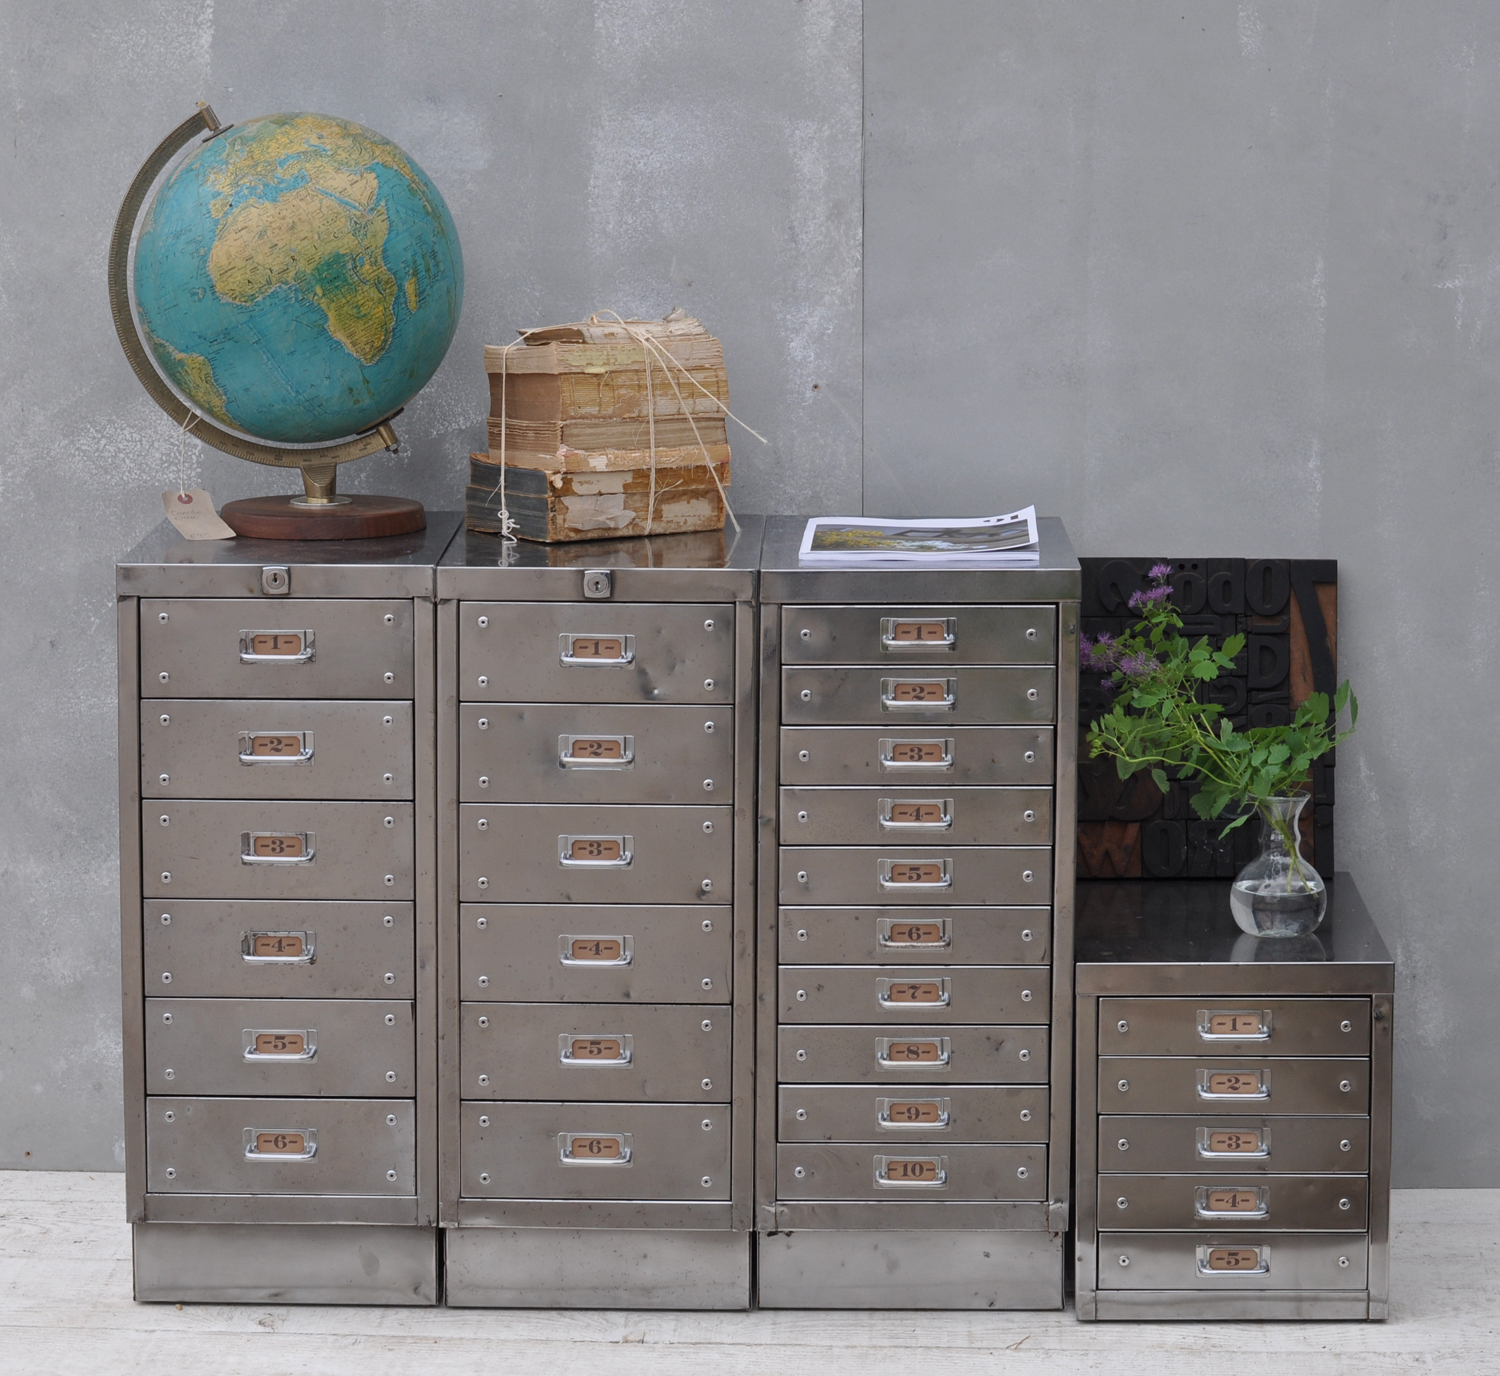 Vintage Industrial Steel Filing Cabinet 10 Drawer Home Barn intended for size 1500 X 1376